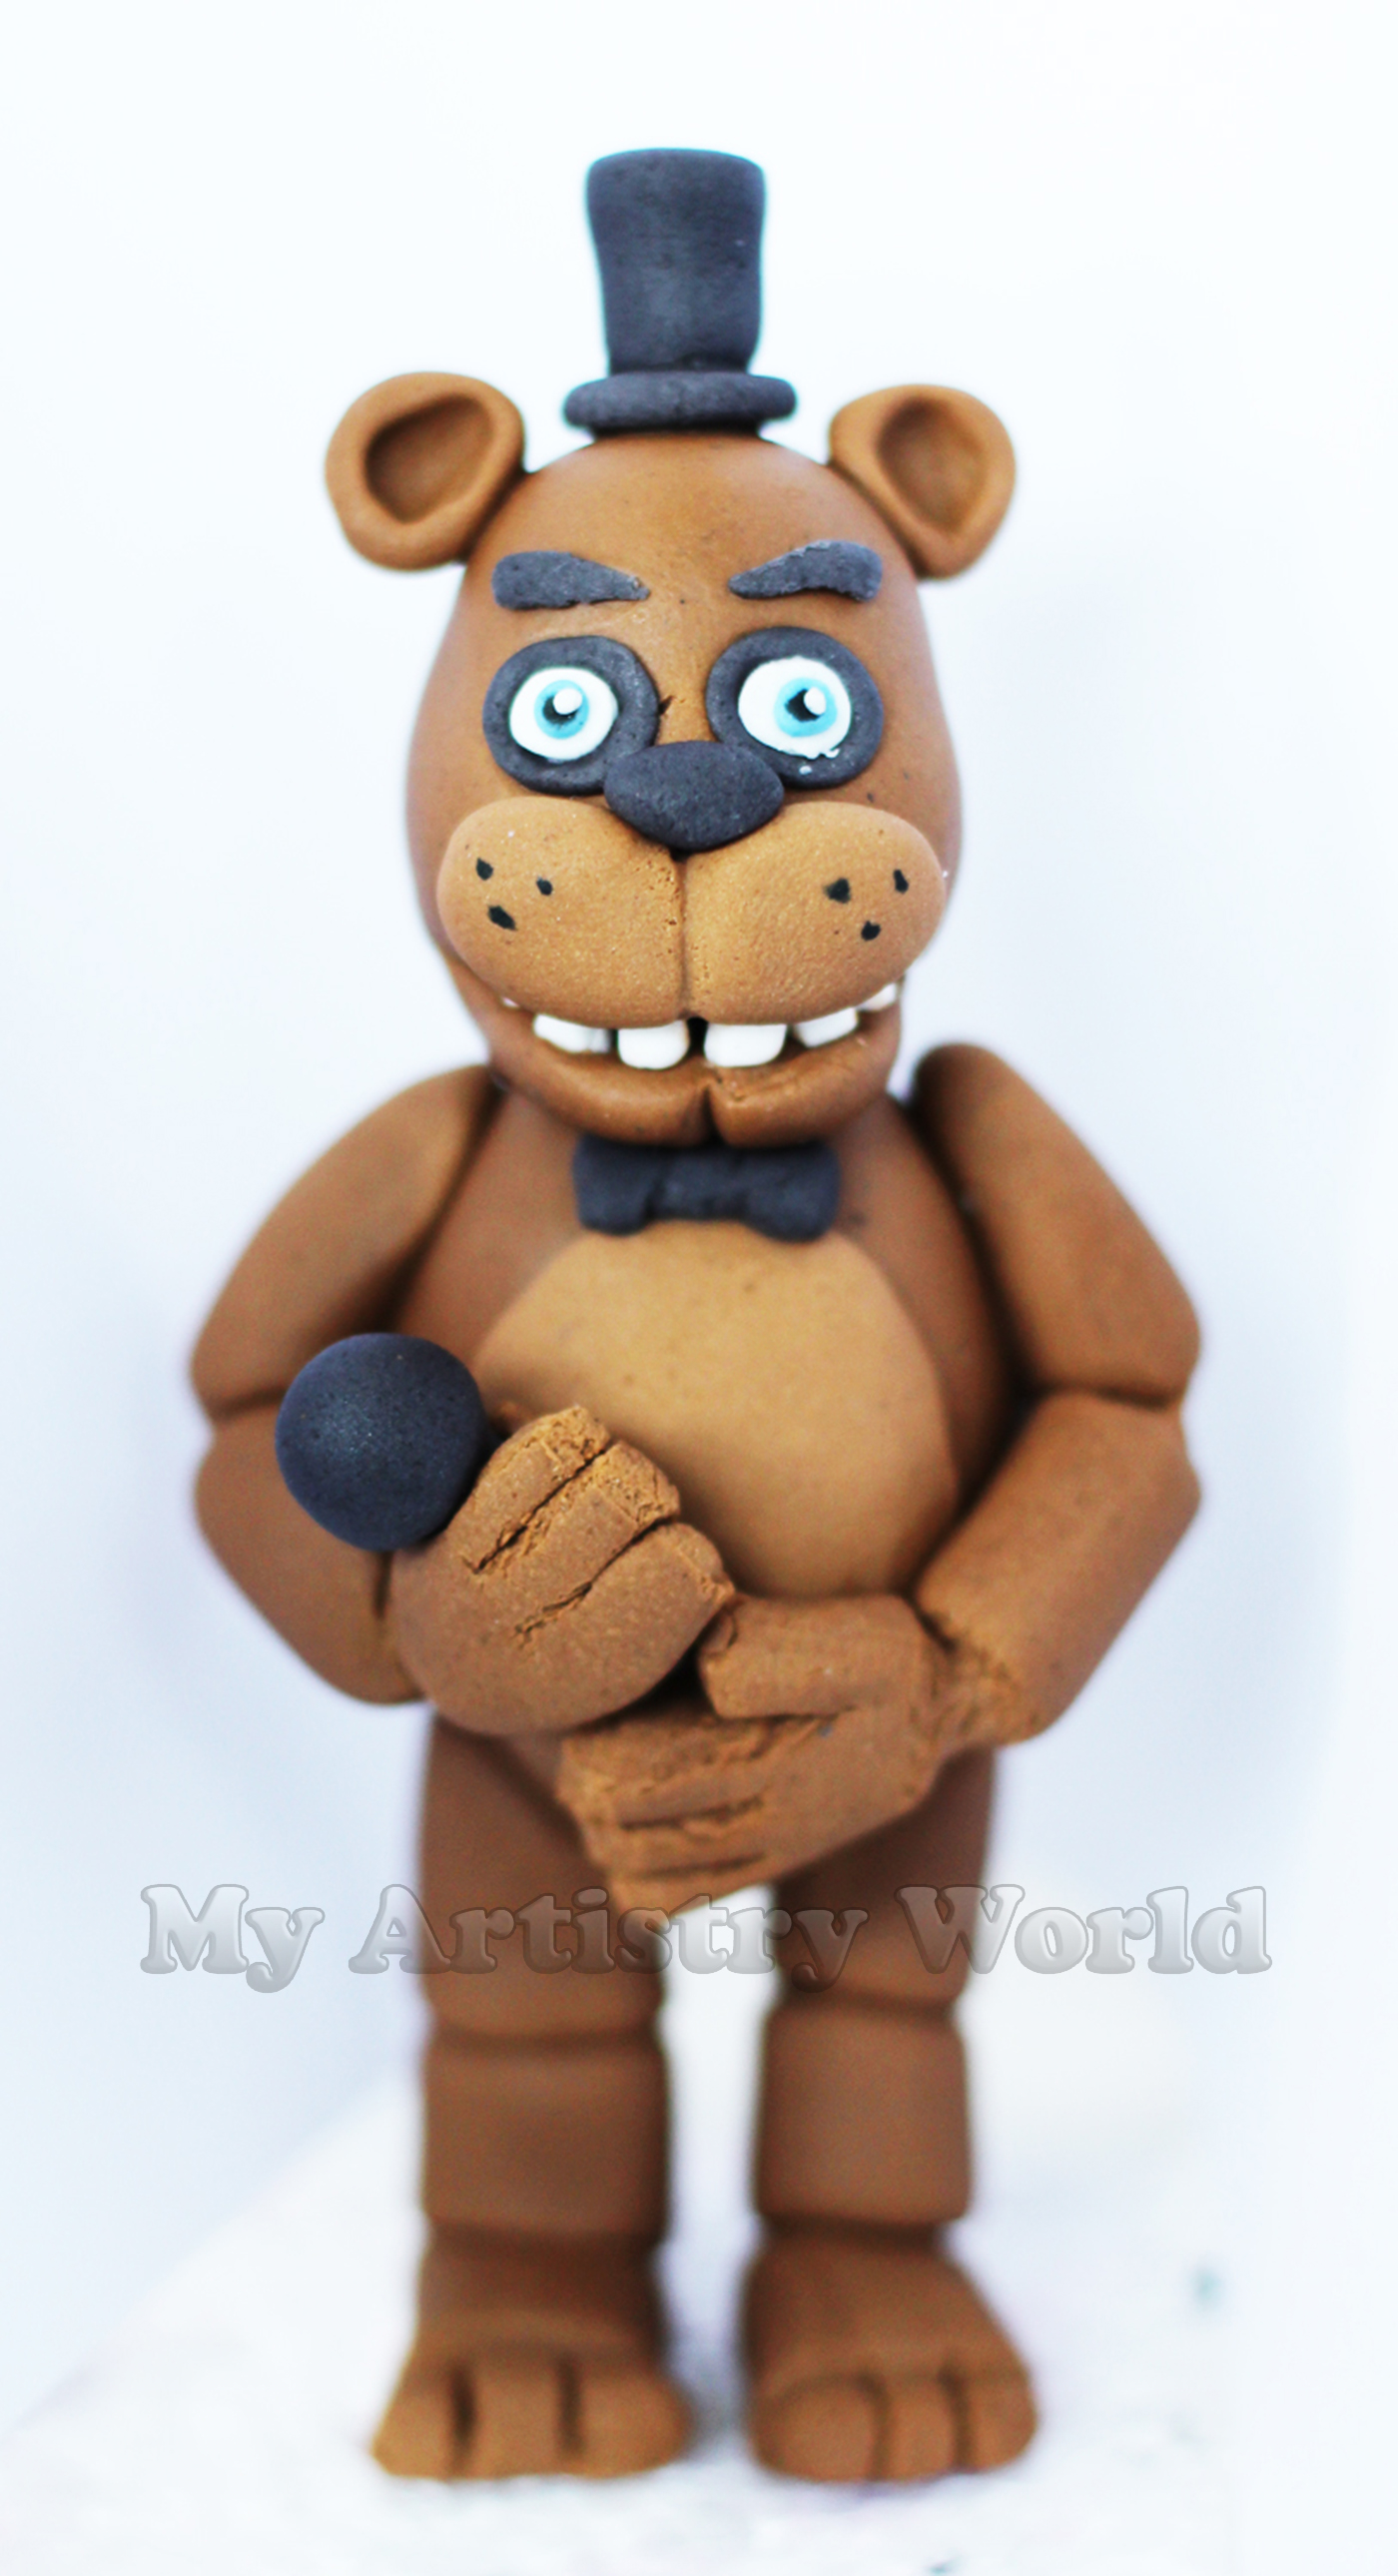 Five Nights at Freddy's cake topper